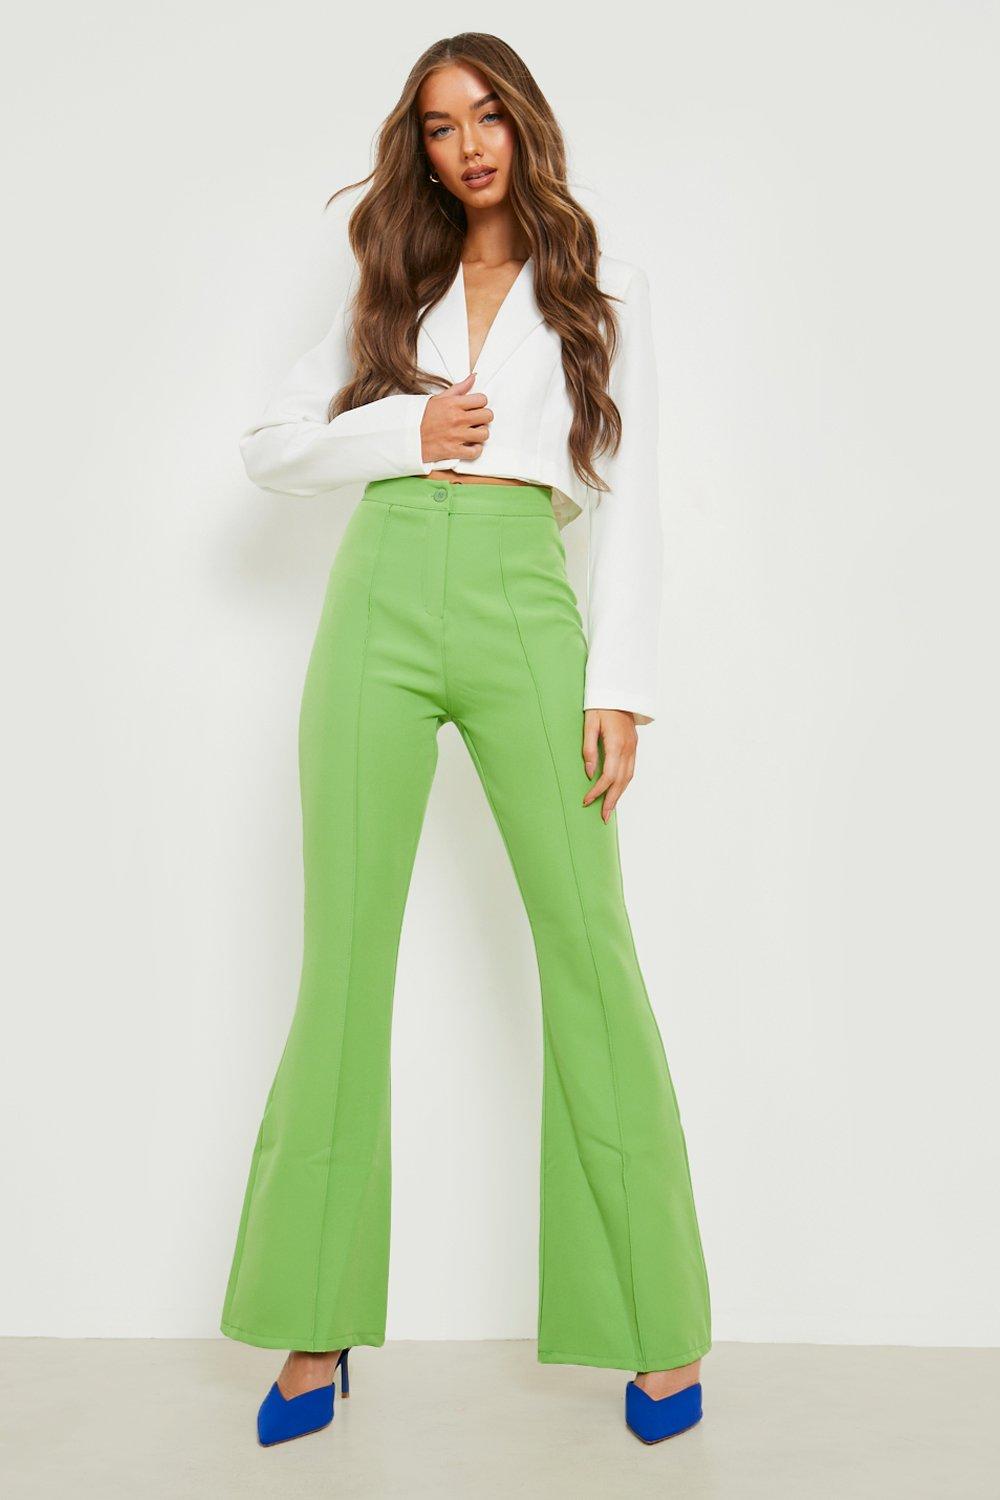 Bell Bottom Pants for Women High Rise Solid Color Thread Flare Pants  Stretchy Fit Bootleg Trousers for Party (XX-Large, Green) 